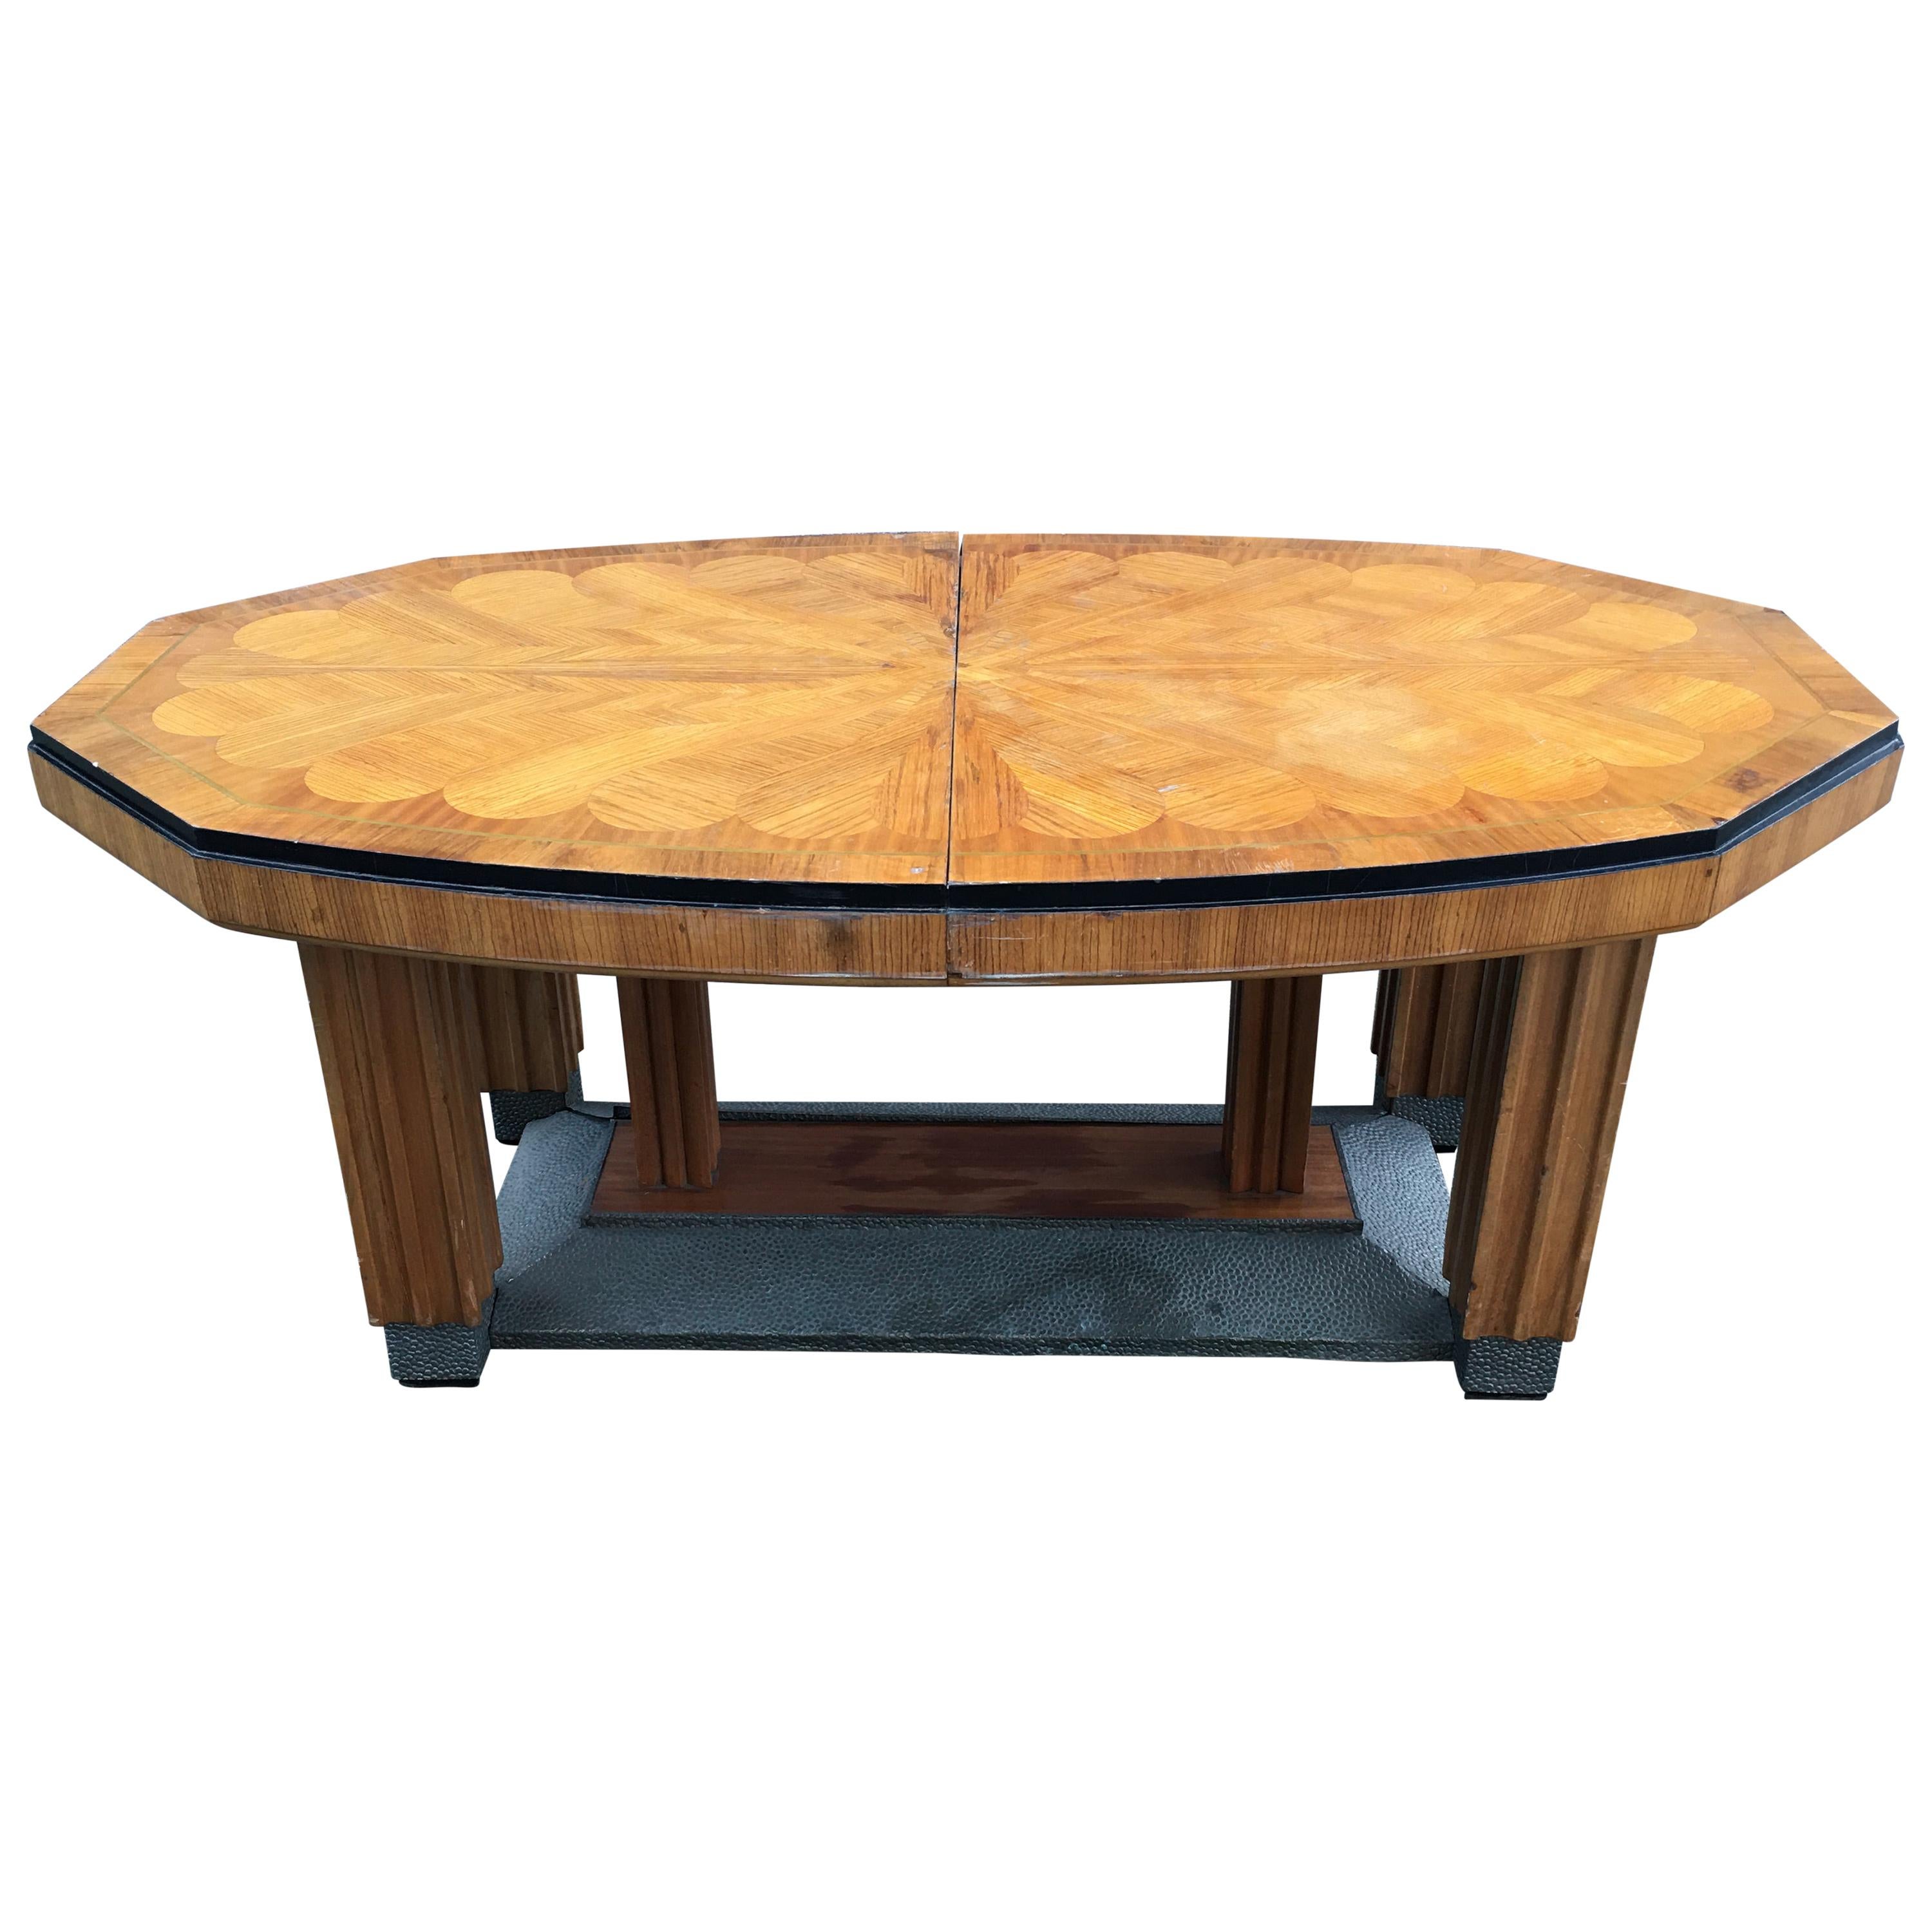 Large Art Deco Dining Table with Marquetry Design on the Top, circa 1925-1930